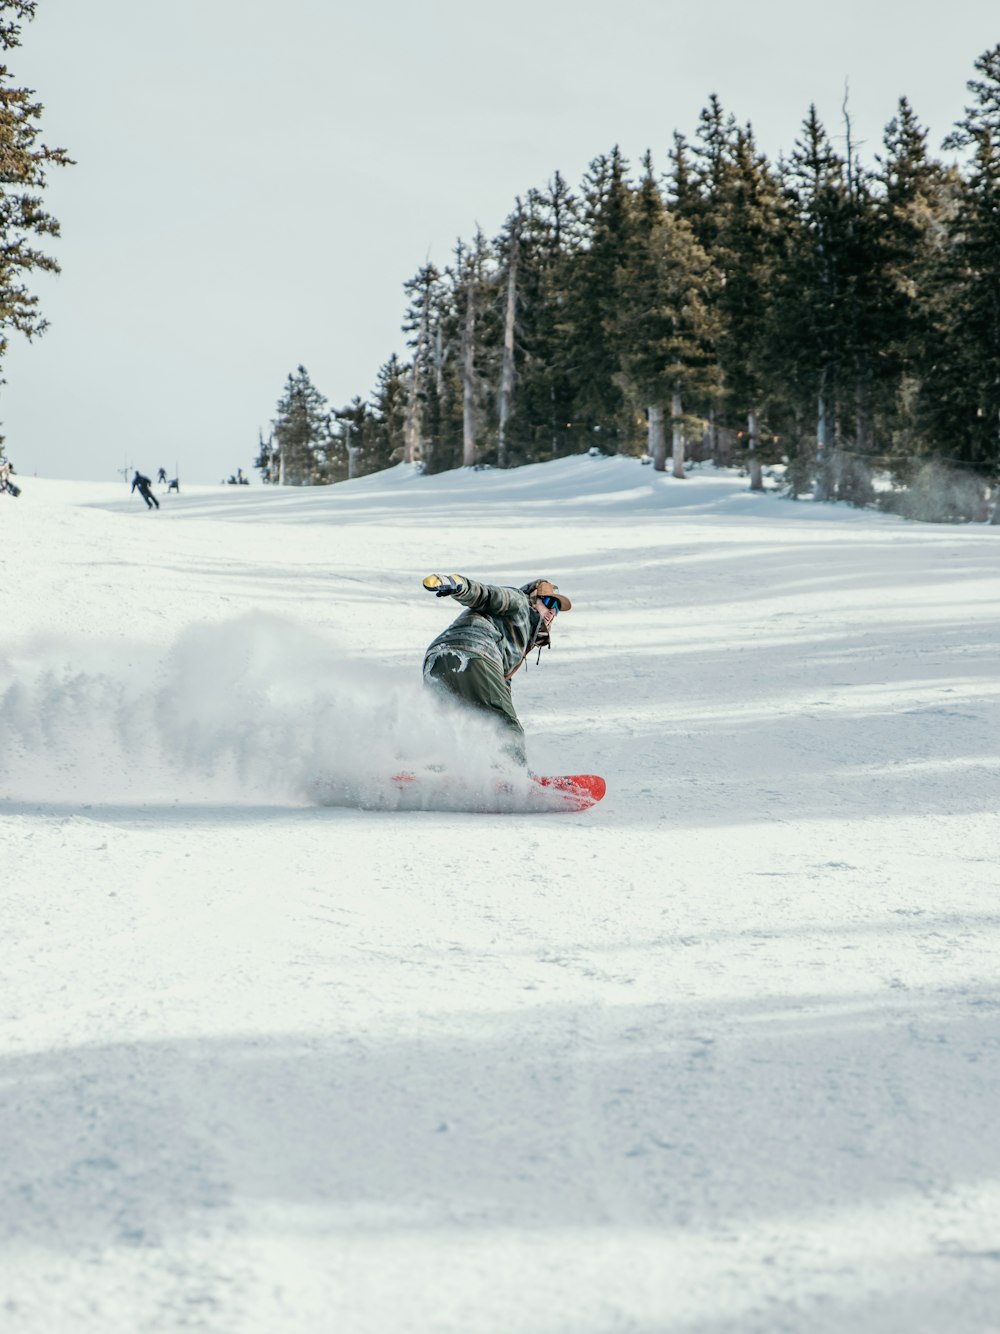 person in black jacket riding on snowboard during daytime